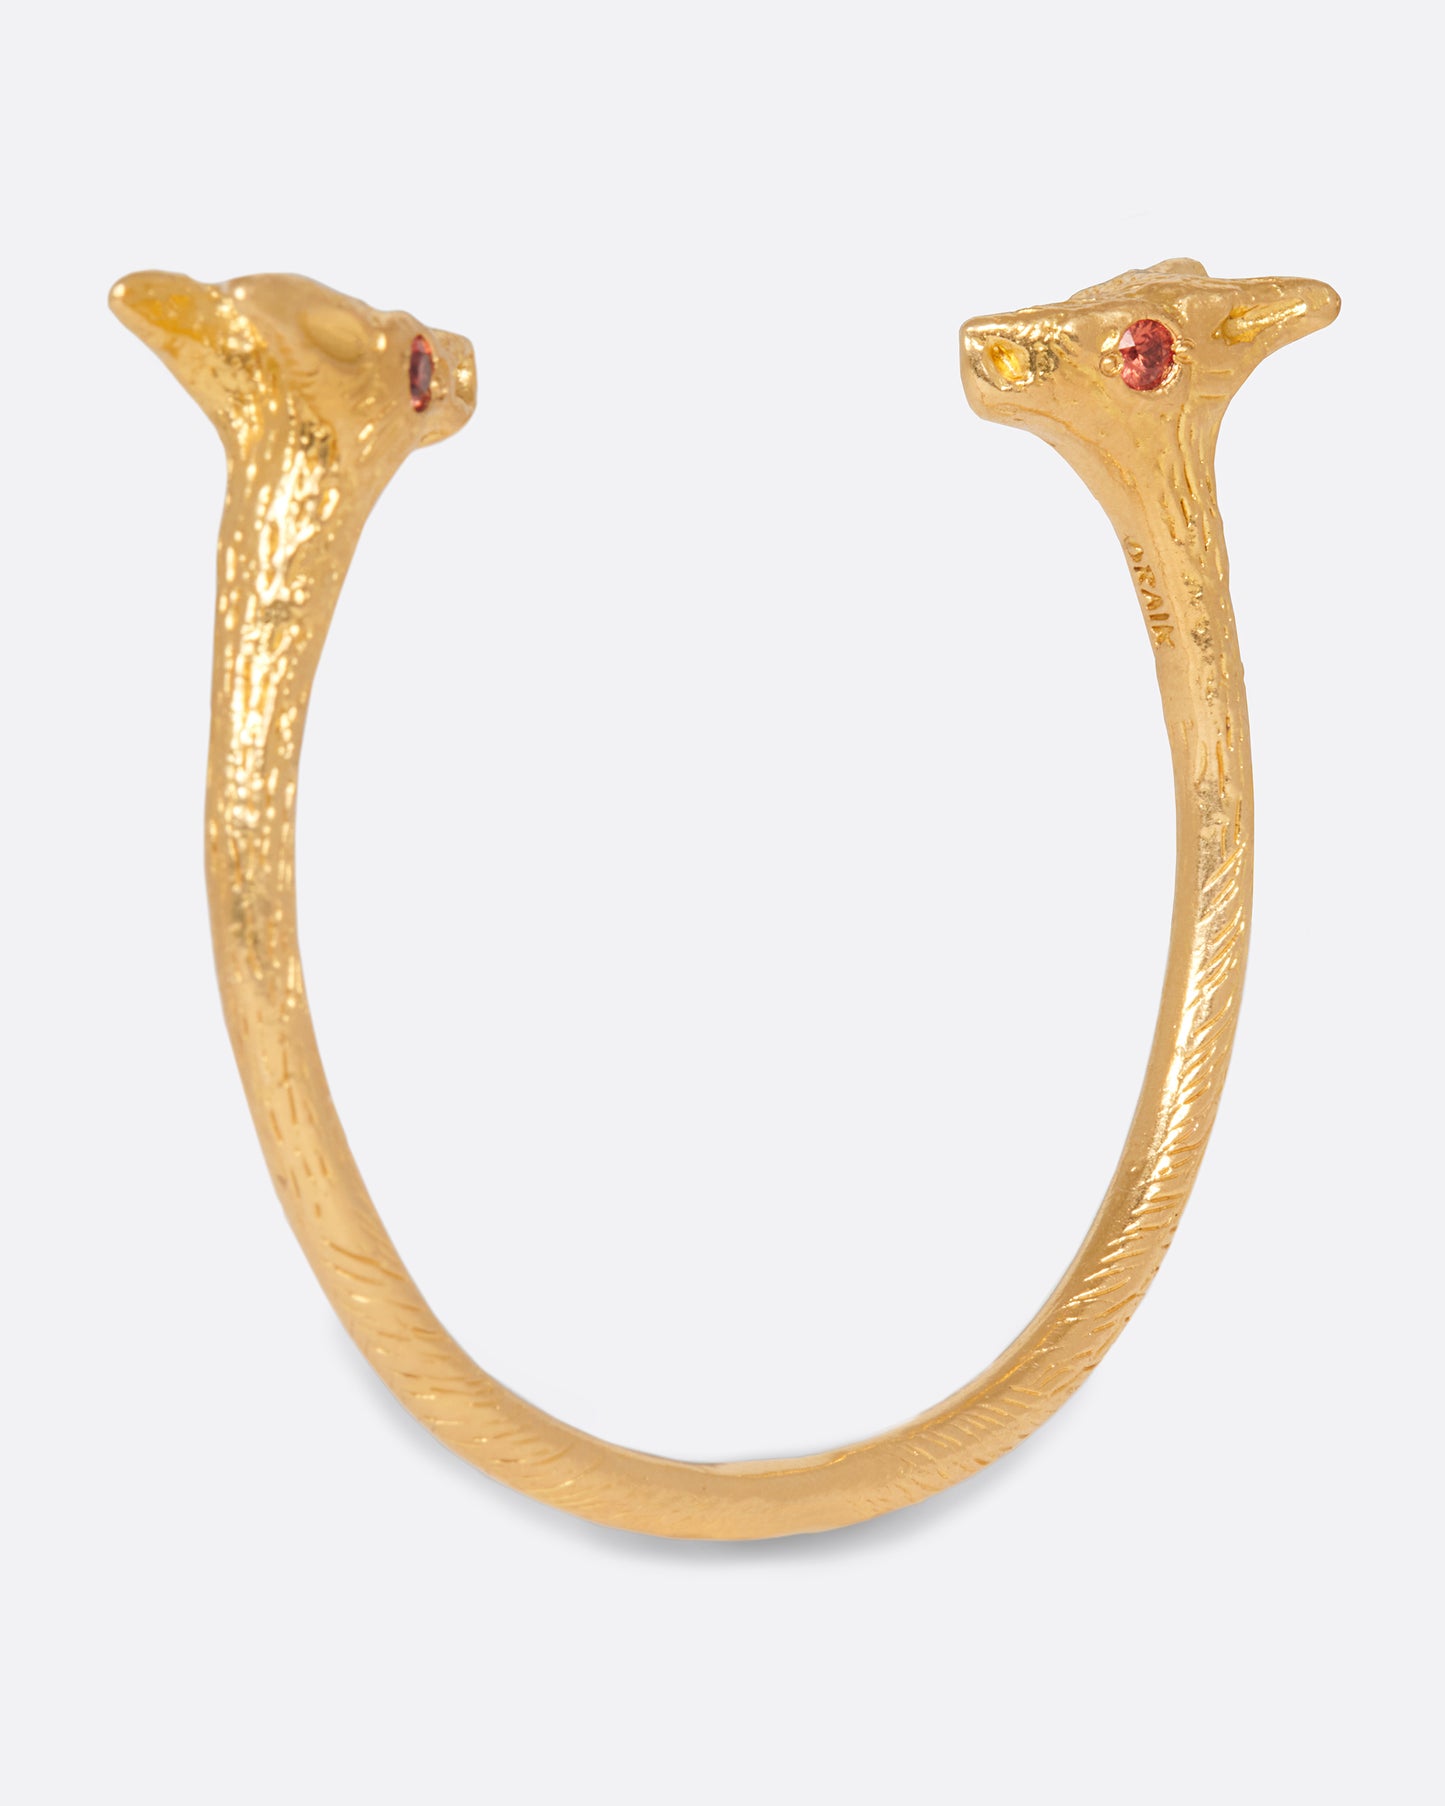 A solid 22k gold cuff bracelet with a fox at either end, accented by orange sapphire eyes.